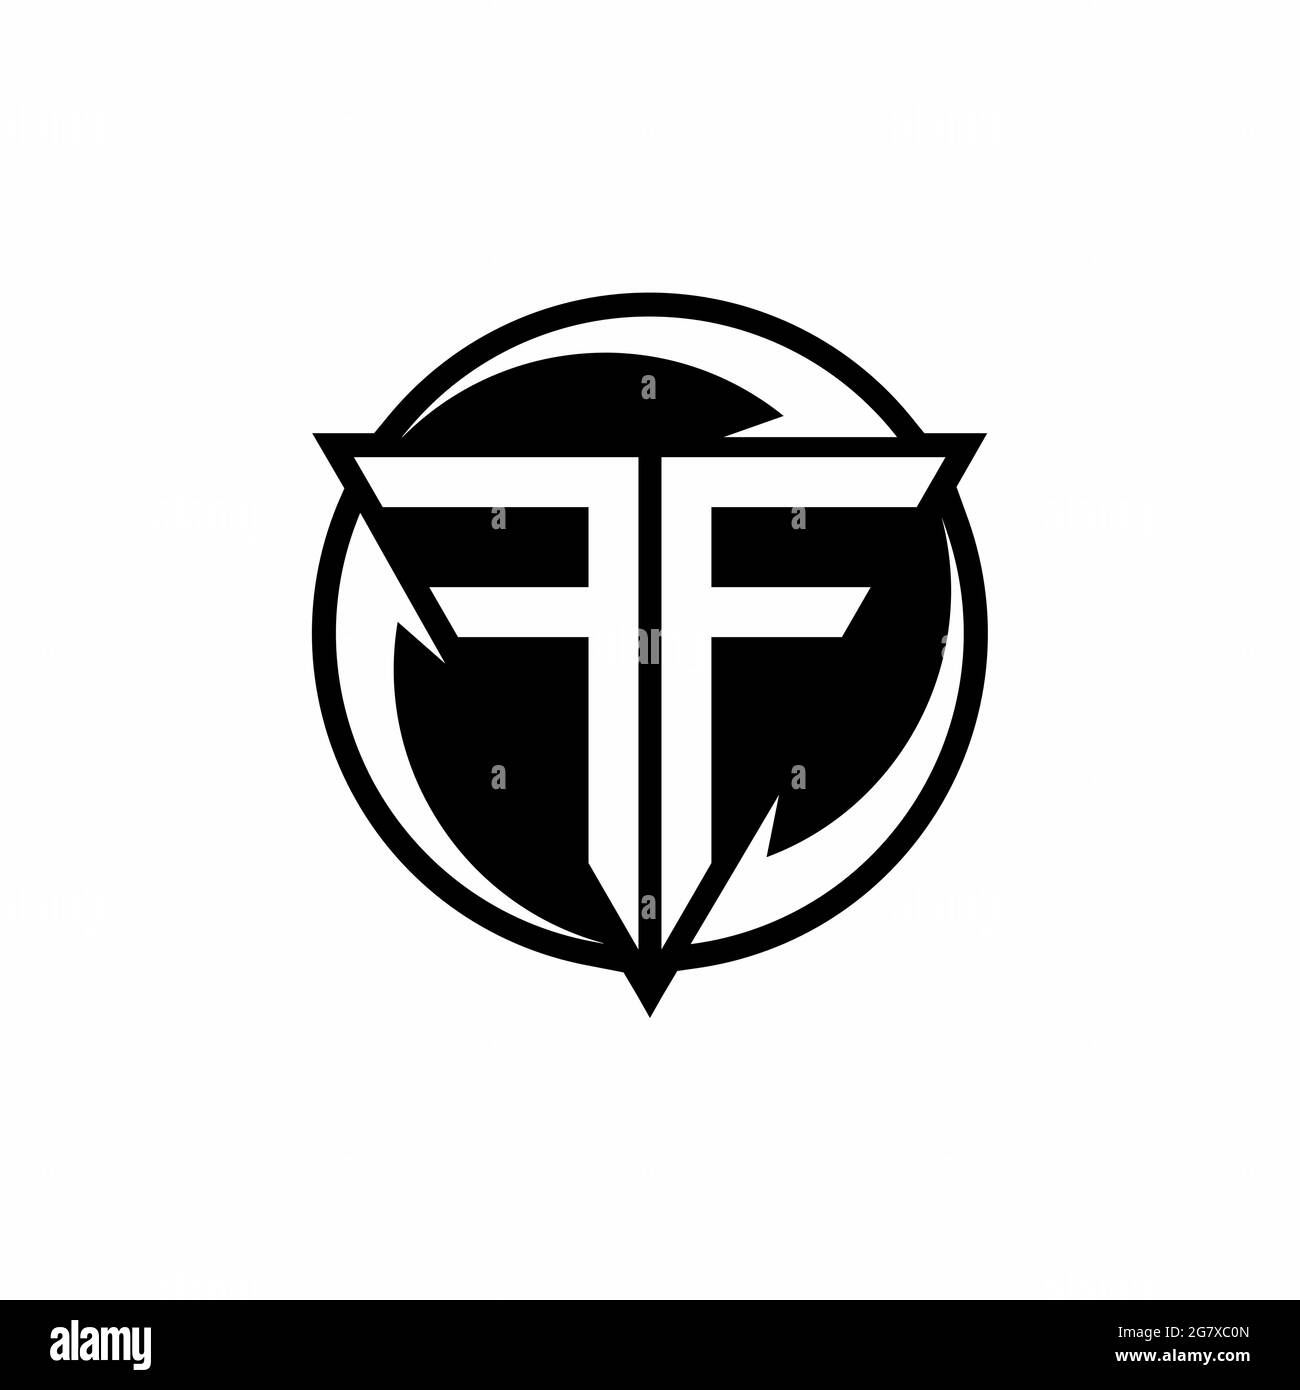 FF logo with triangle shape and circle rounded design template ...